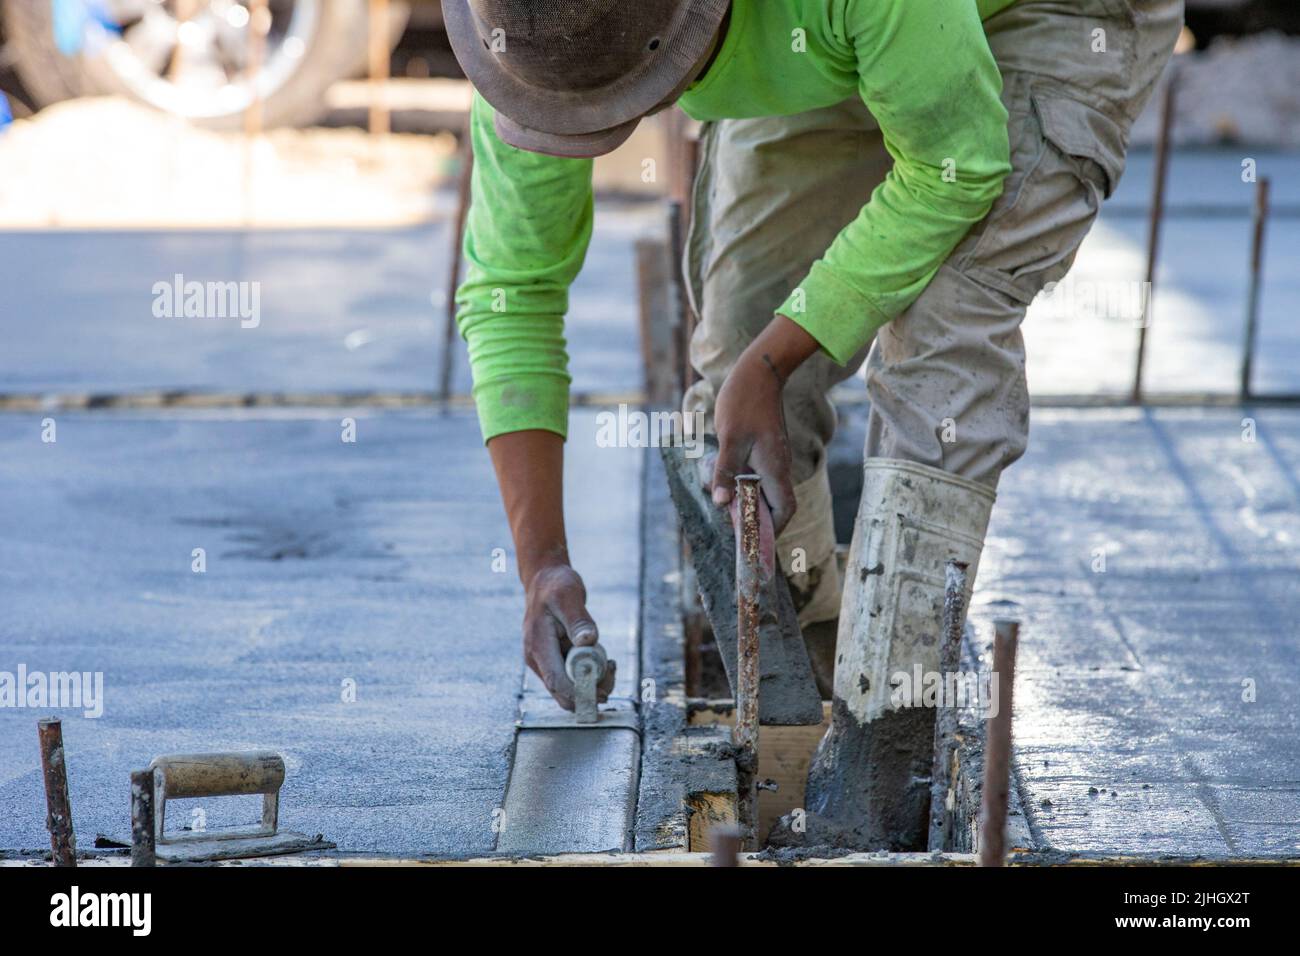 A construction worker is using a cornering trowel to finish the edge of a freshly poured concrete slap as a driveway. Stock Photo